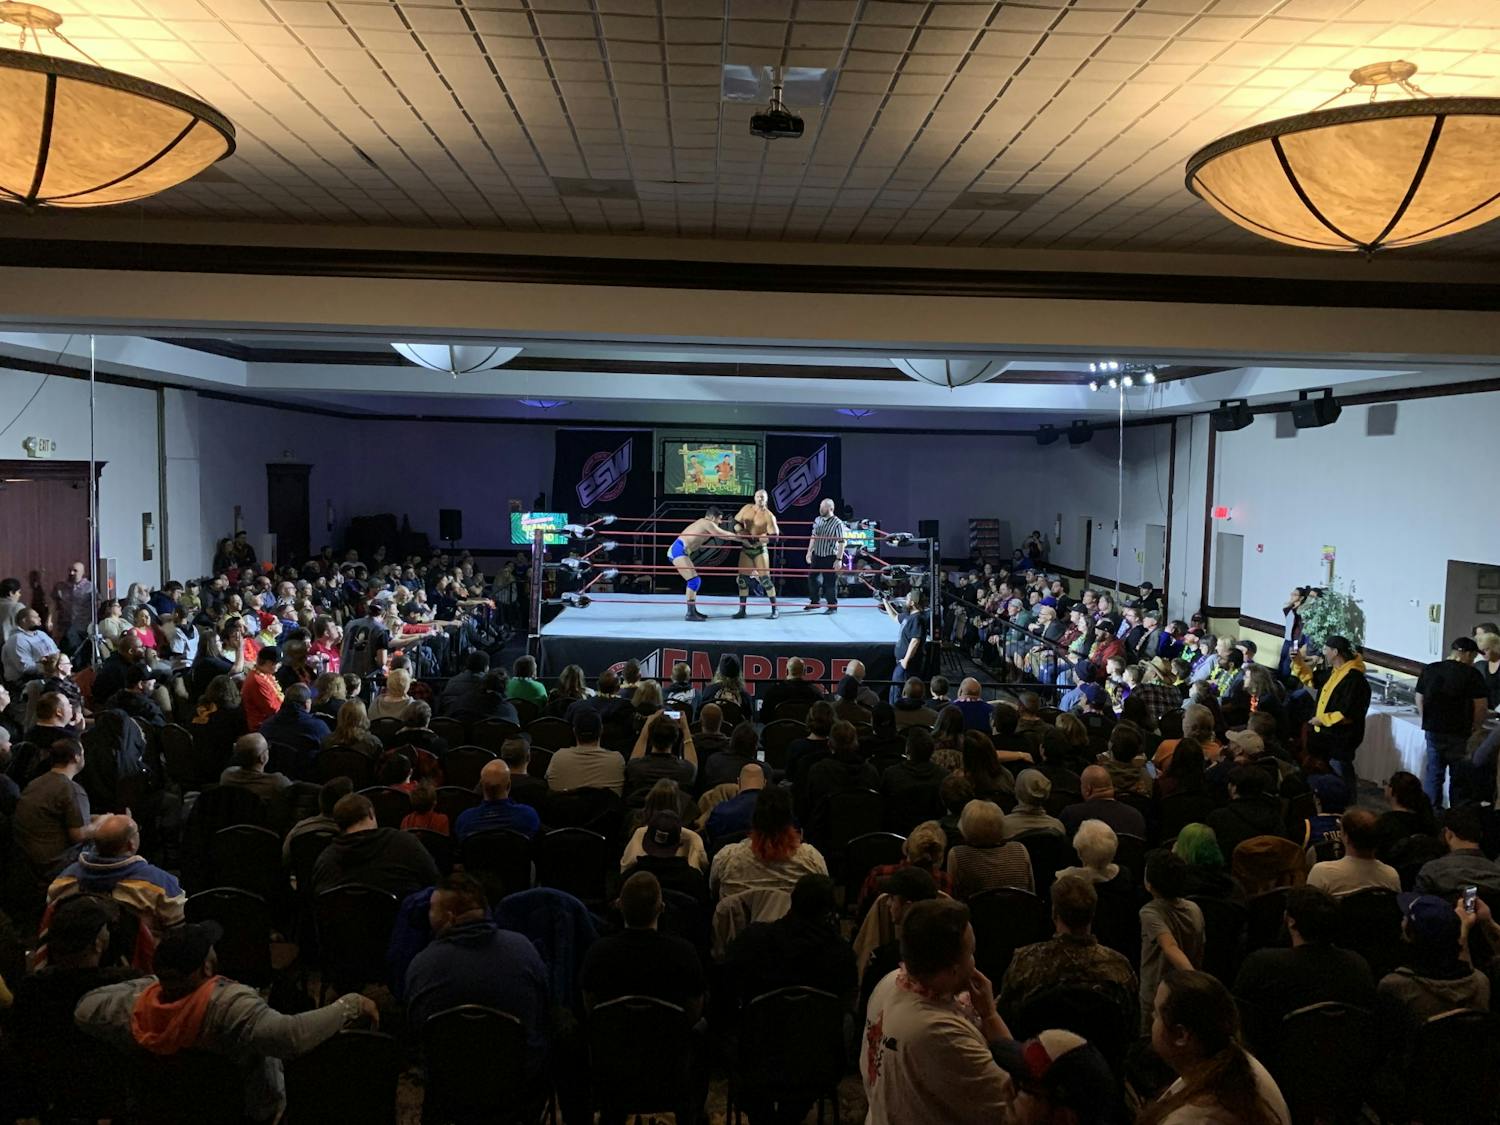 Buffalo-based independent wrestling promotion Empire State Wrestling hasn’t held any events since the pandemic began, and everyone from wrestlers to fans to members of the press are feeling the effects.